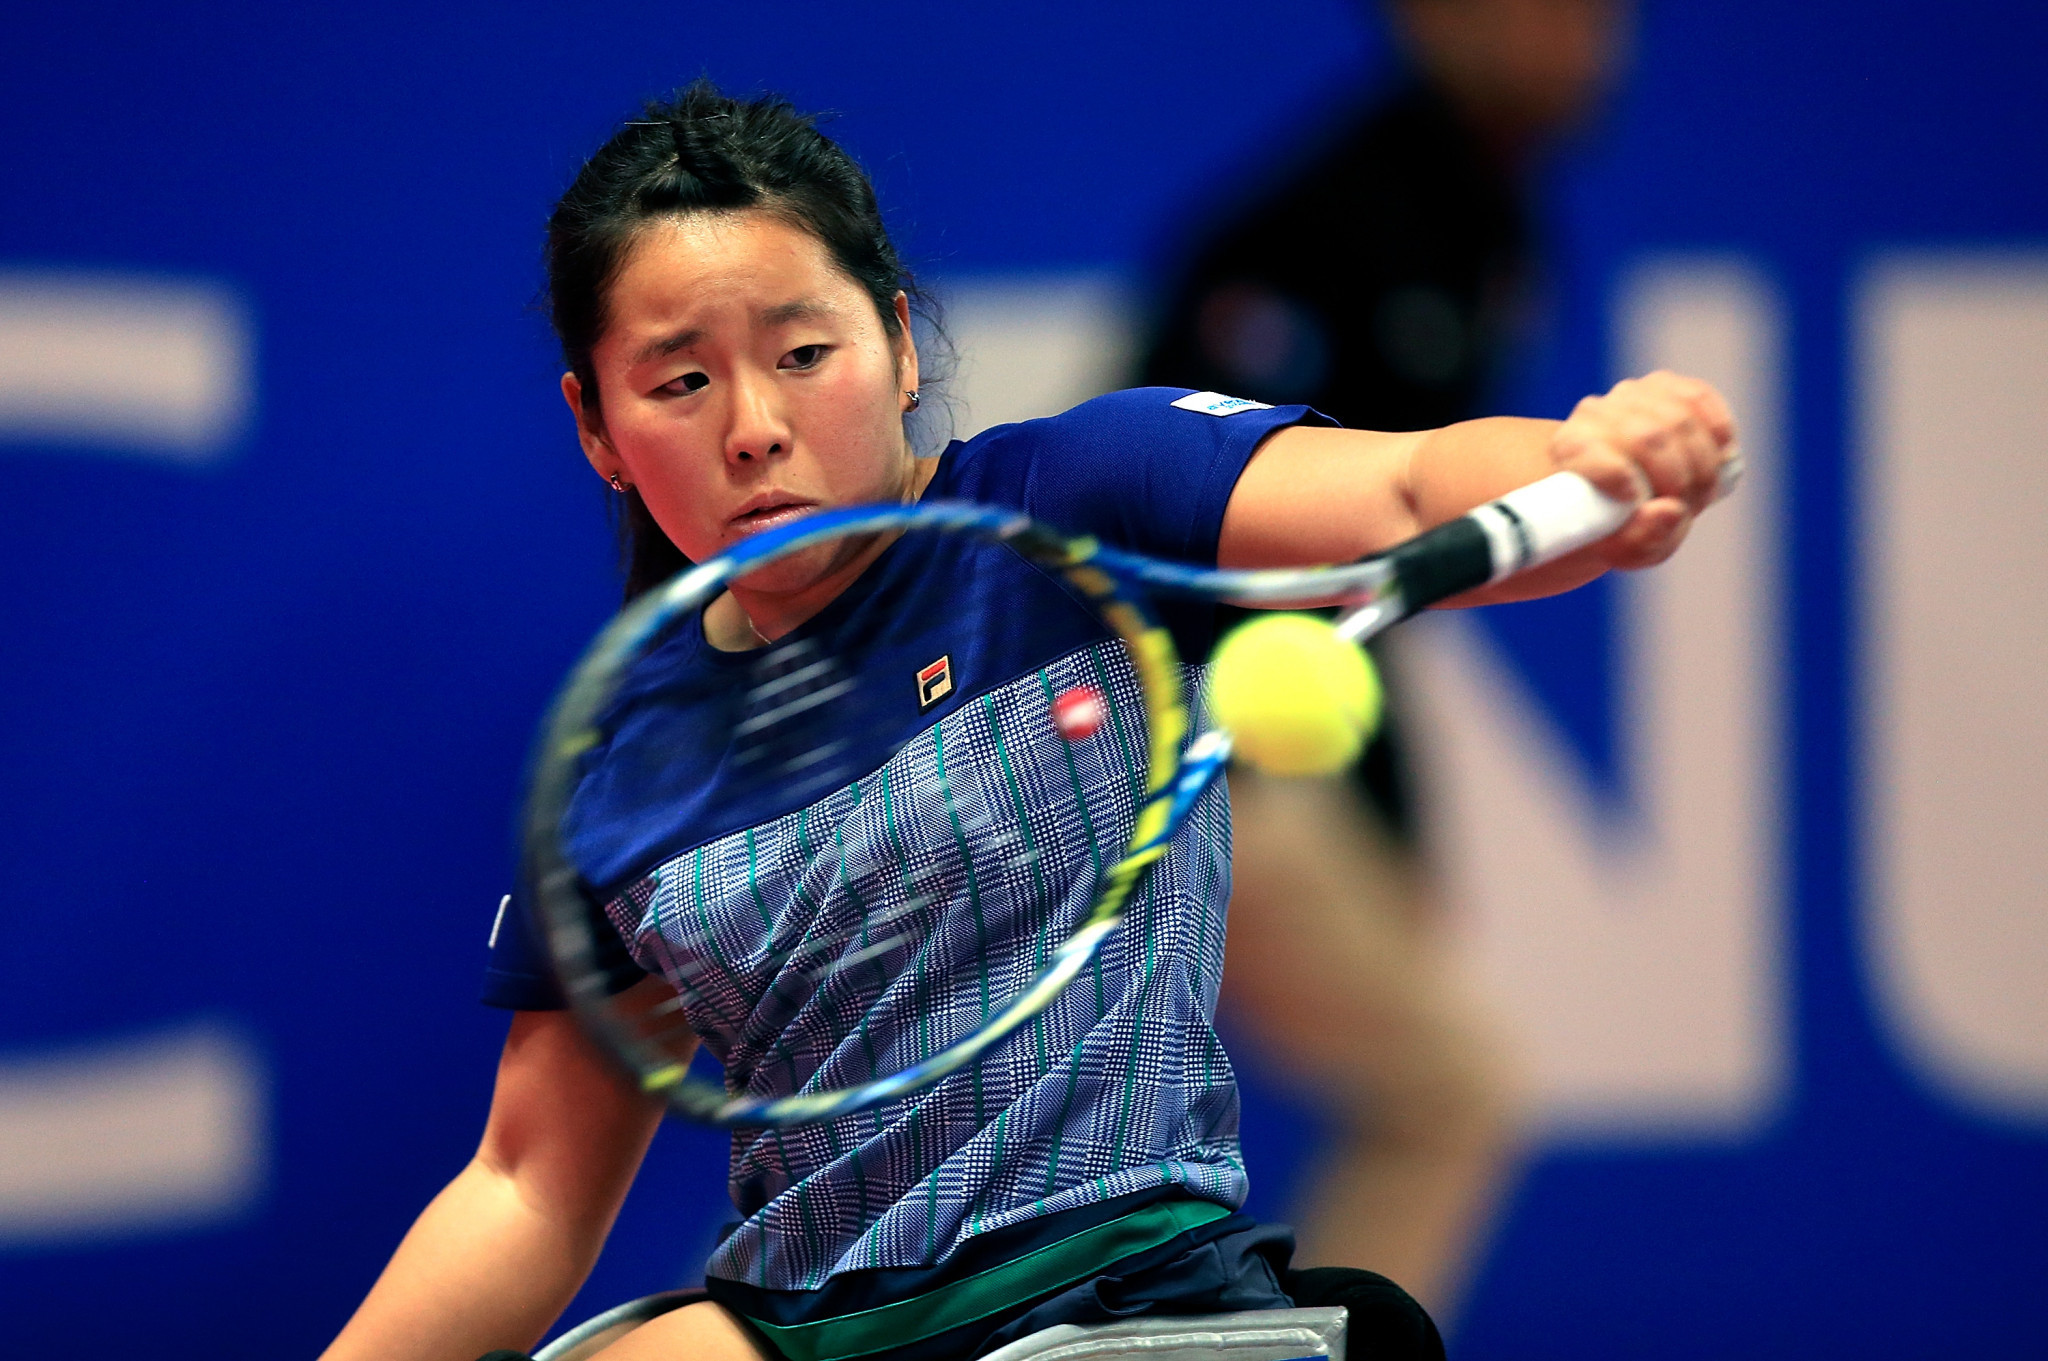 Kamiji impresses on opening day of NEC Wheelchair Tennis Masters